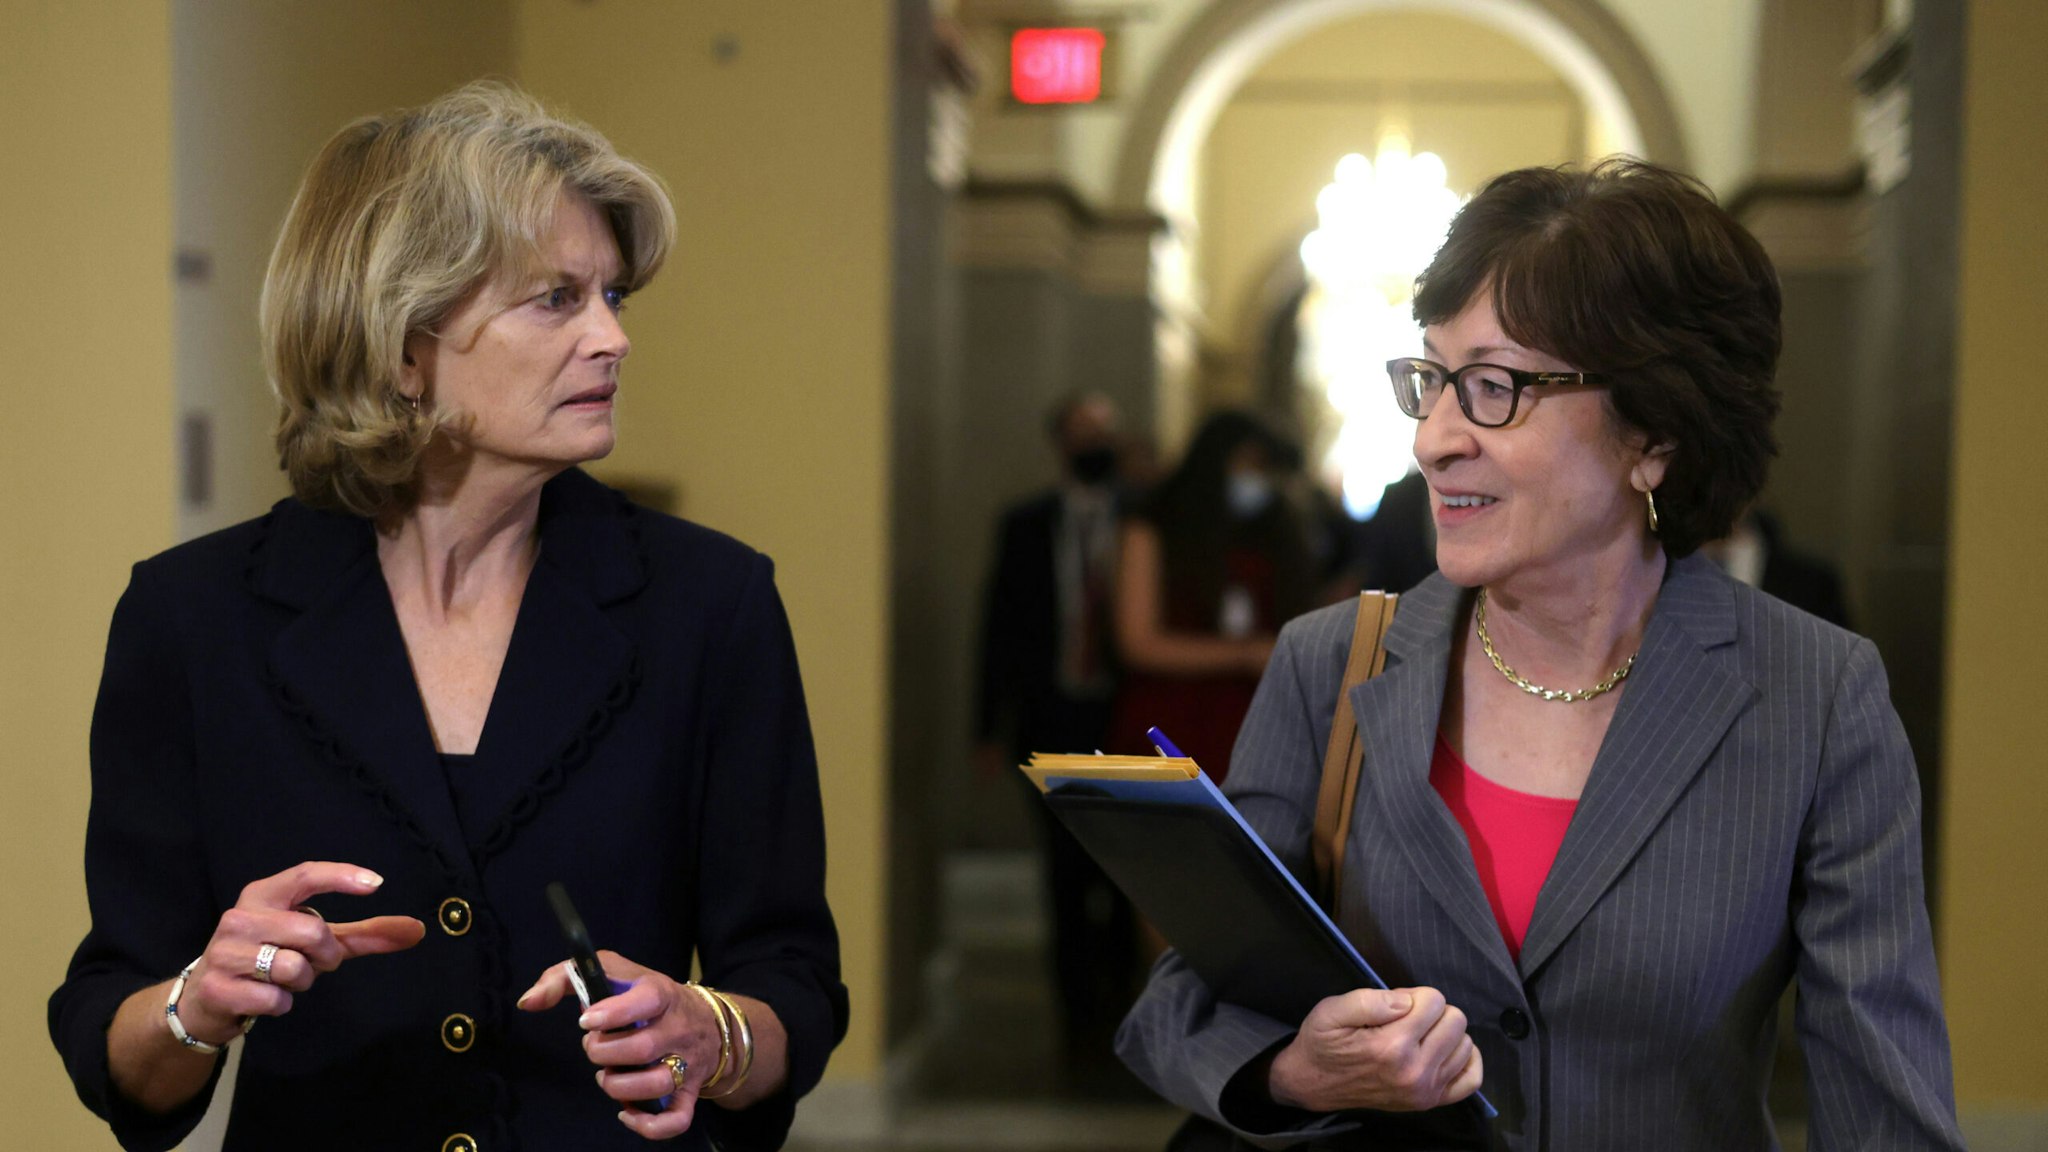 Sens. Lisa Murkowski (R-AK) (L) and Susan Collins (R-ME) leave after a Senate GOP conference meeting at the Capitol October 7, 2021 in Washington, DC.